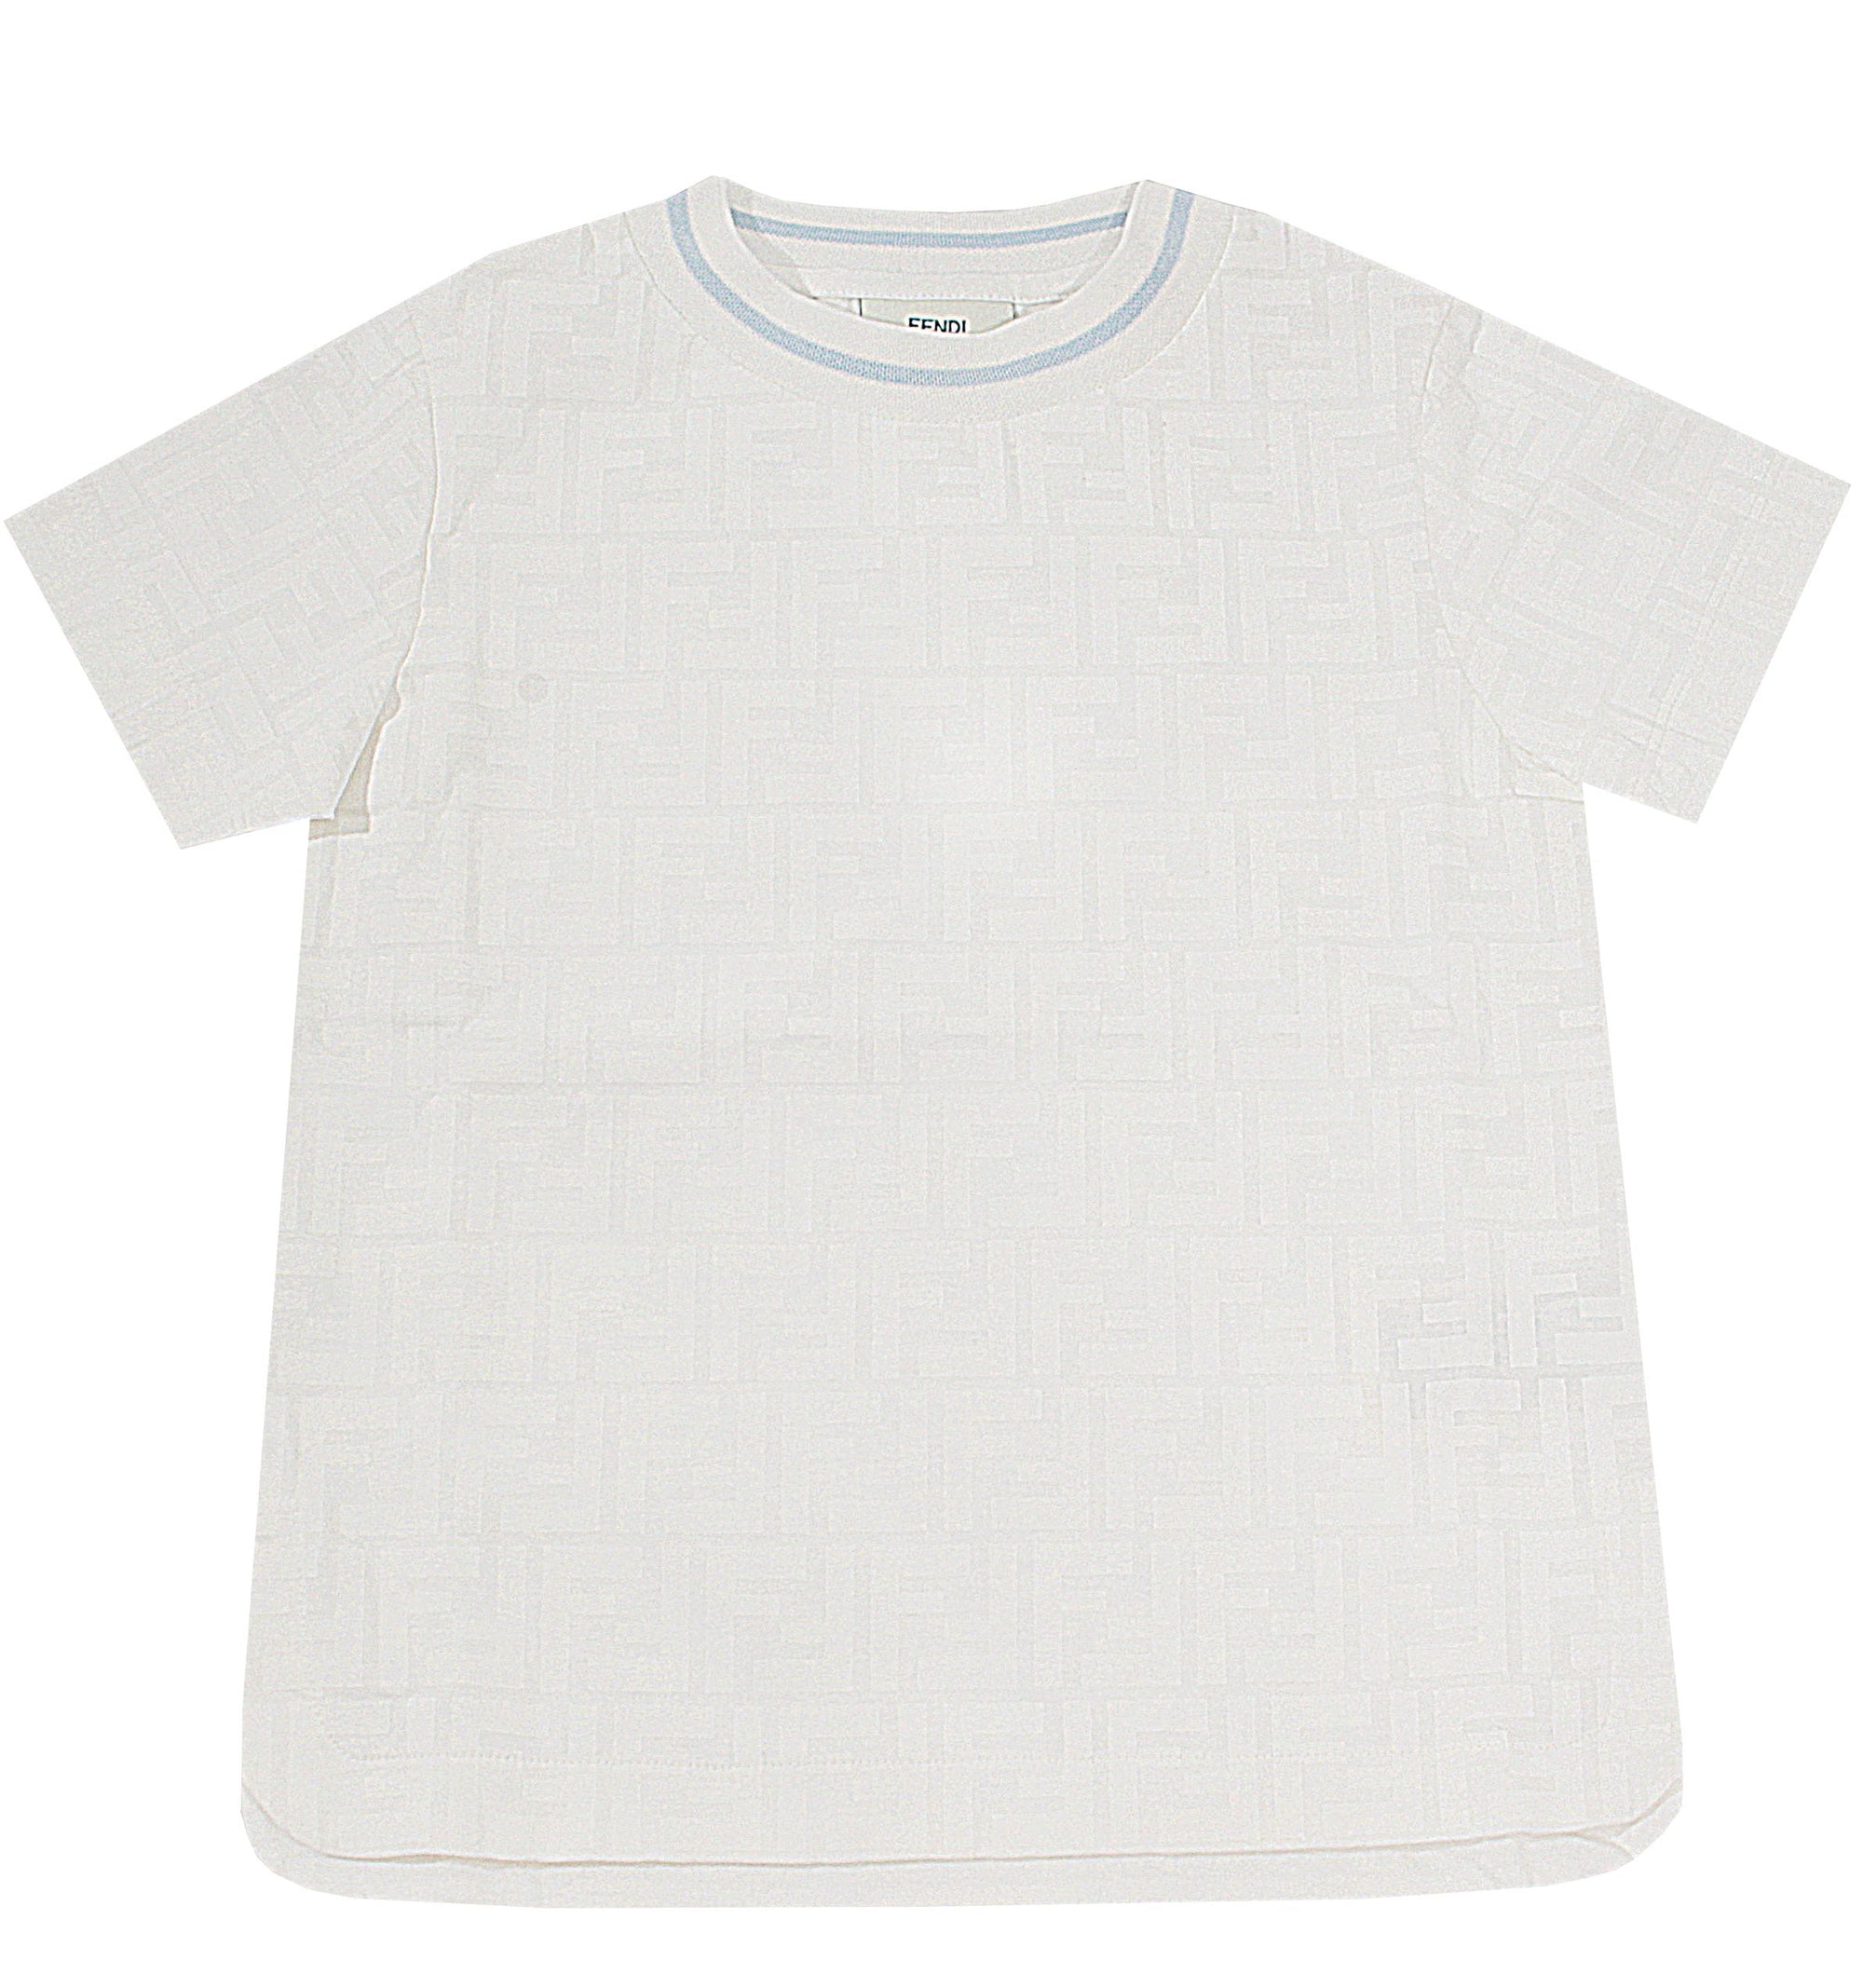 Kids SS All Over Print Tee With Racer Stripe - White